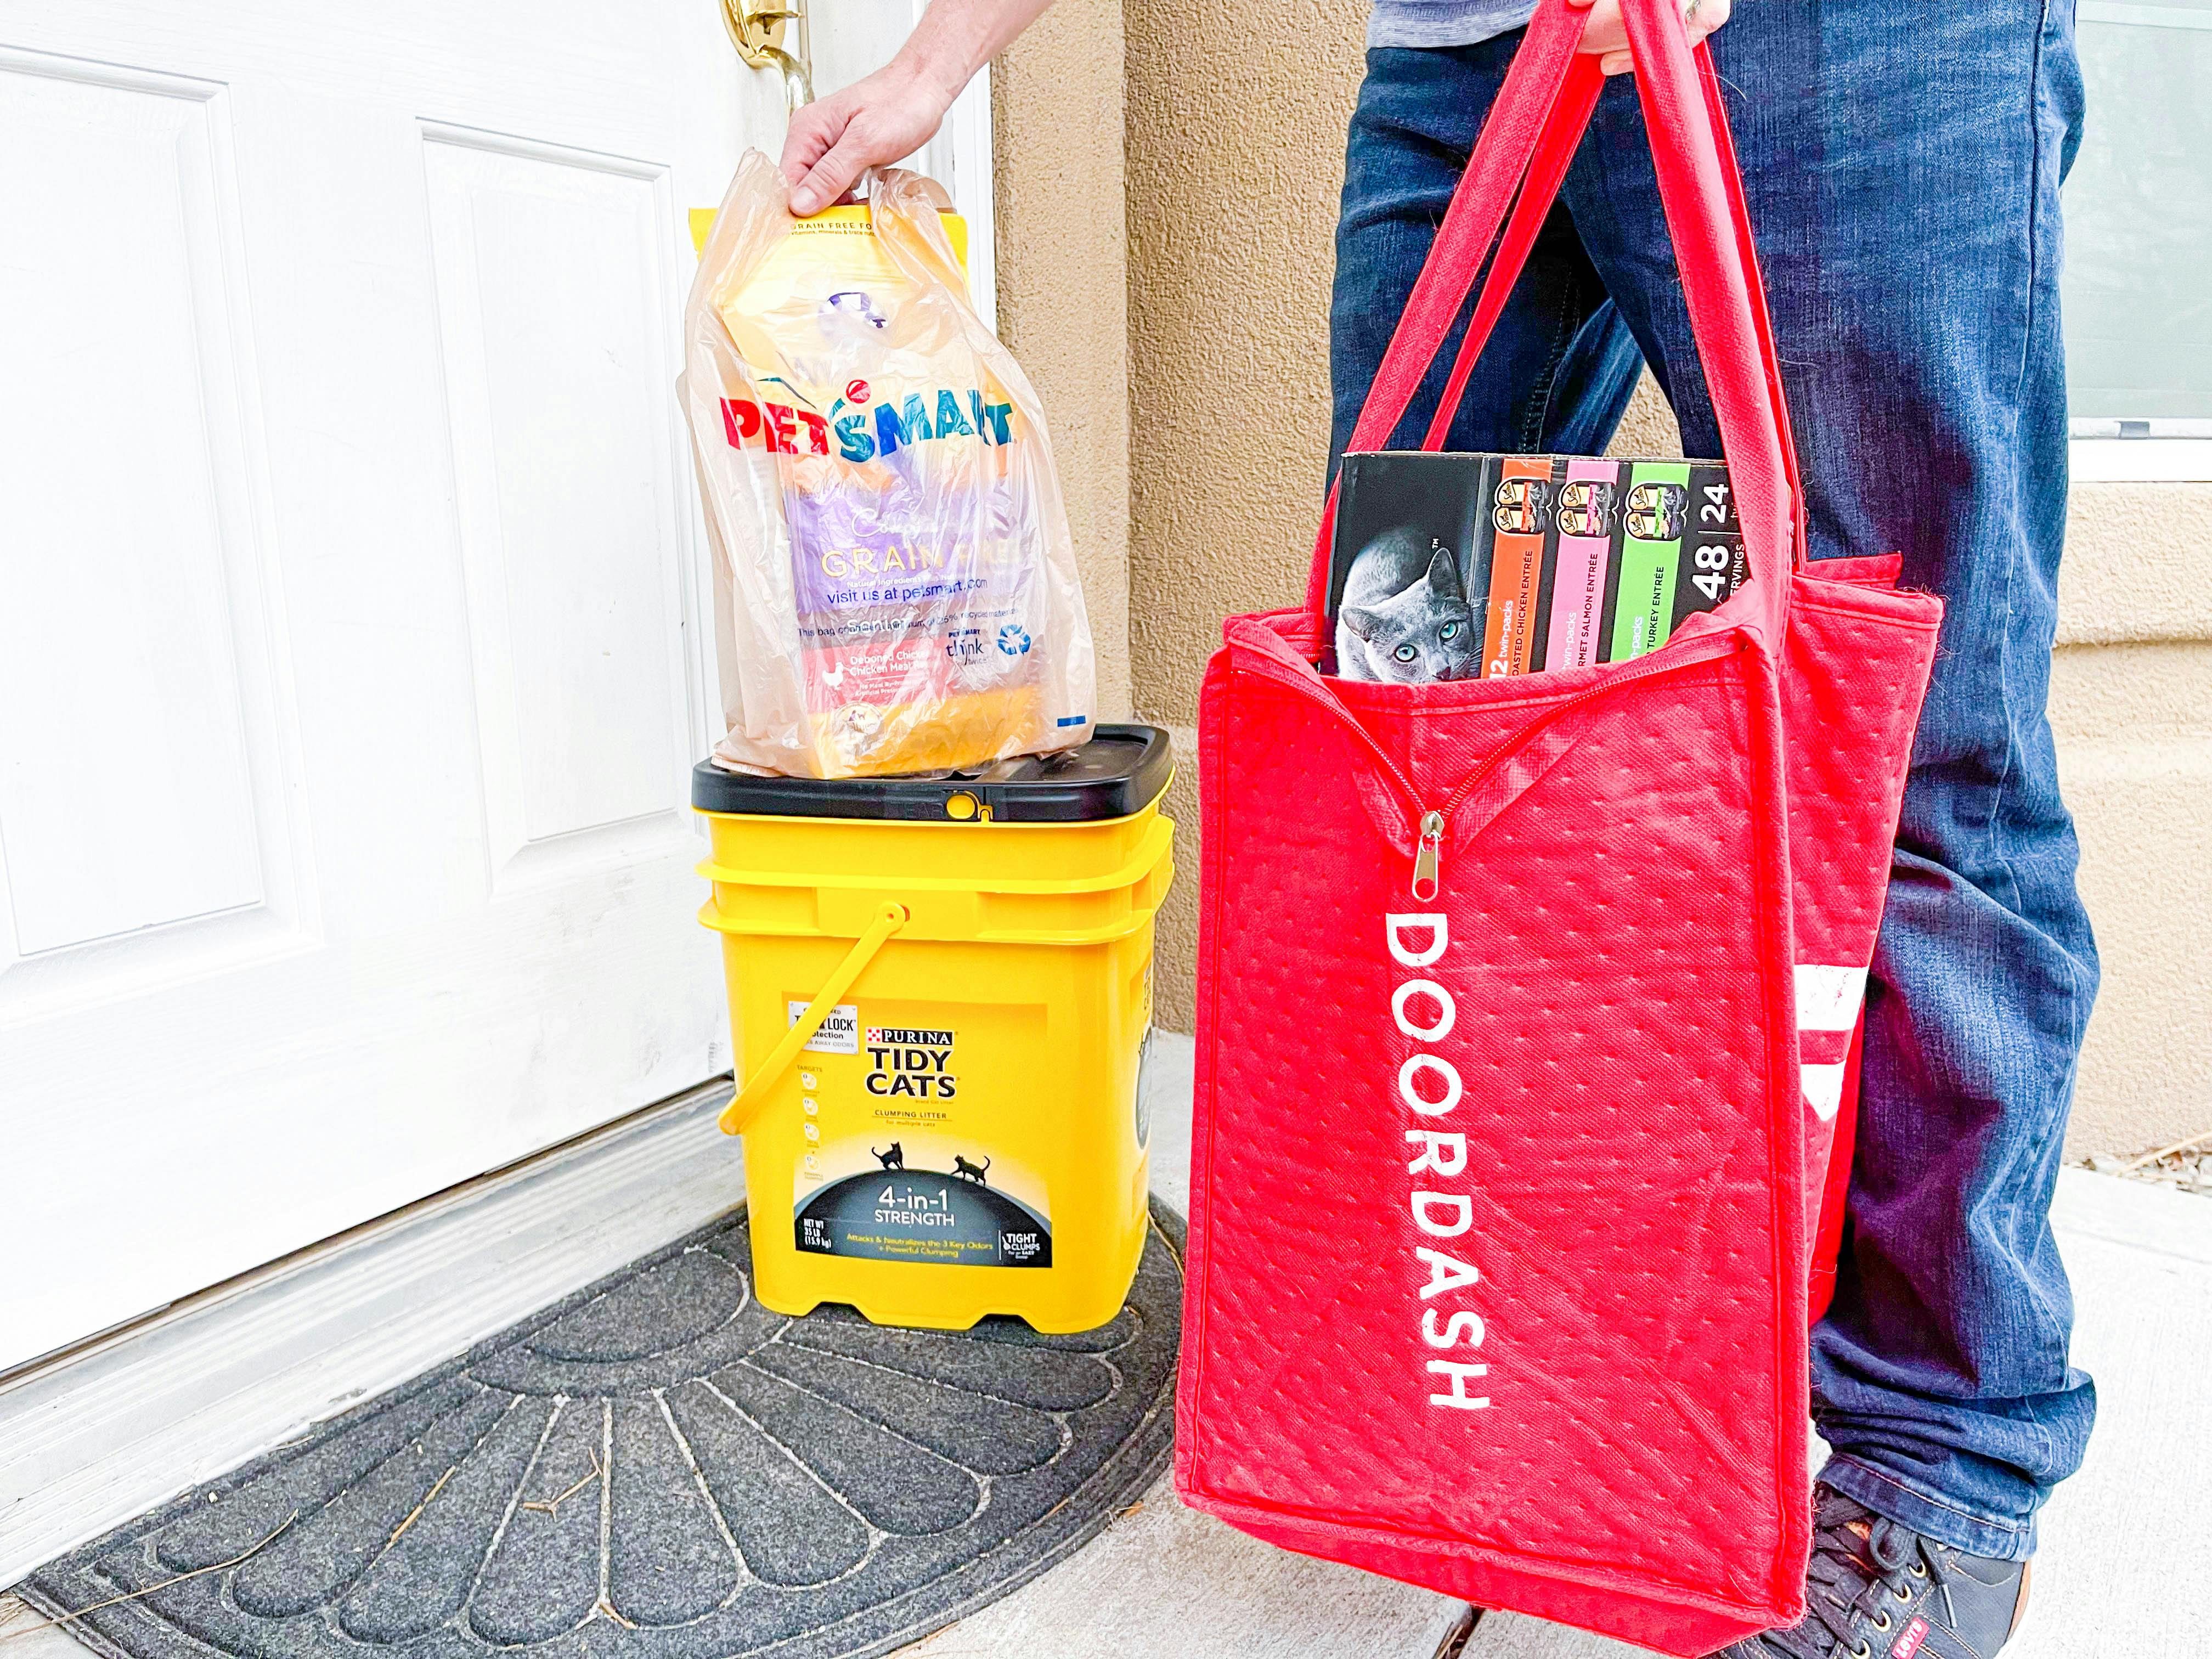 A Doordash delivery person standing on a front porch, setting a PetSmart bag onto a box of Tidy Cat kitty litter and holding a large DoorDash delivery bag with more pet products.